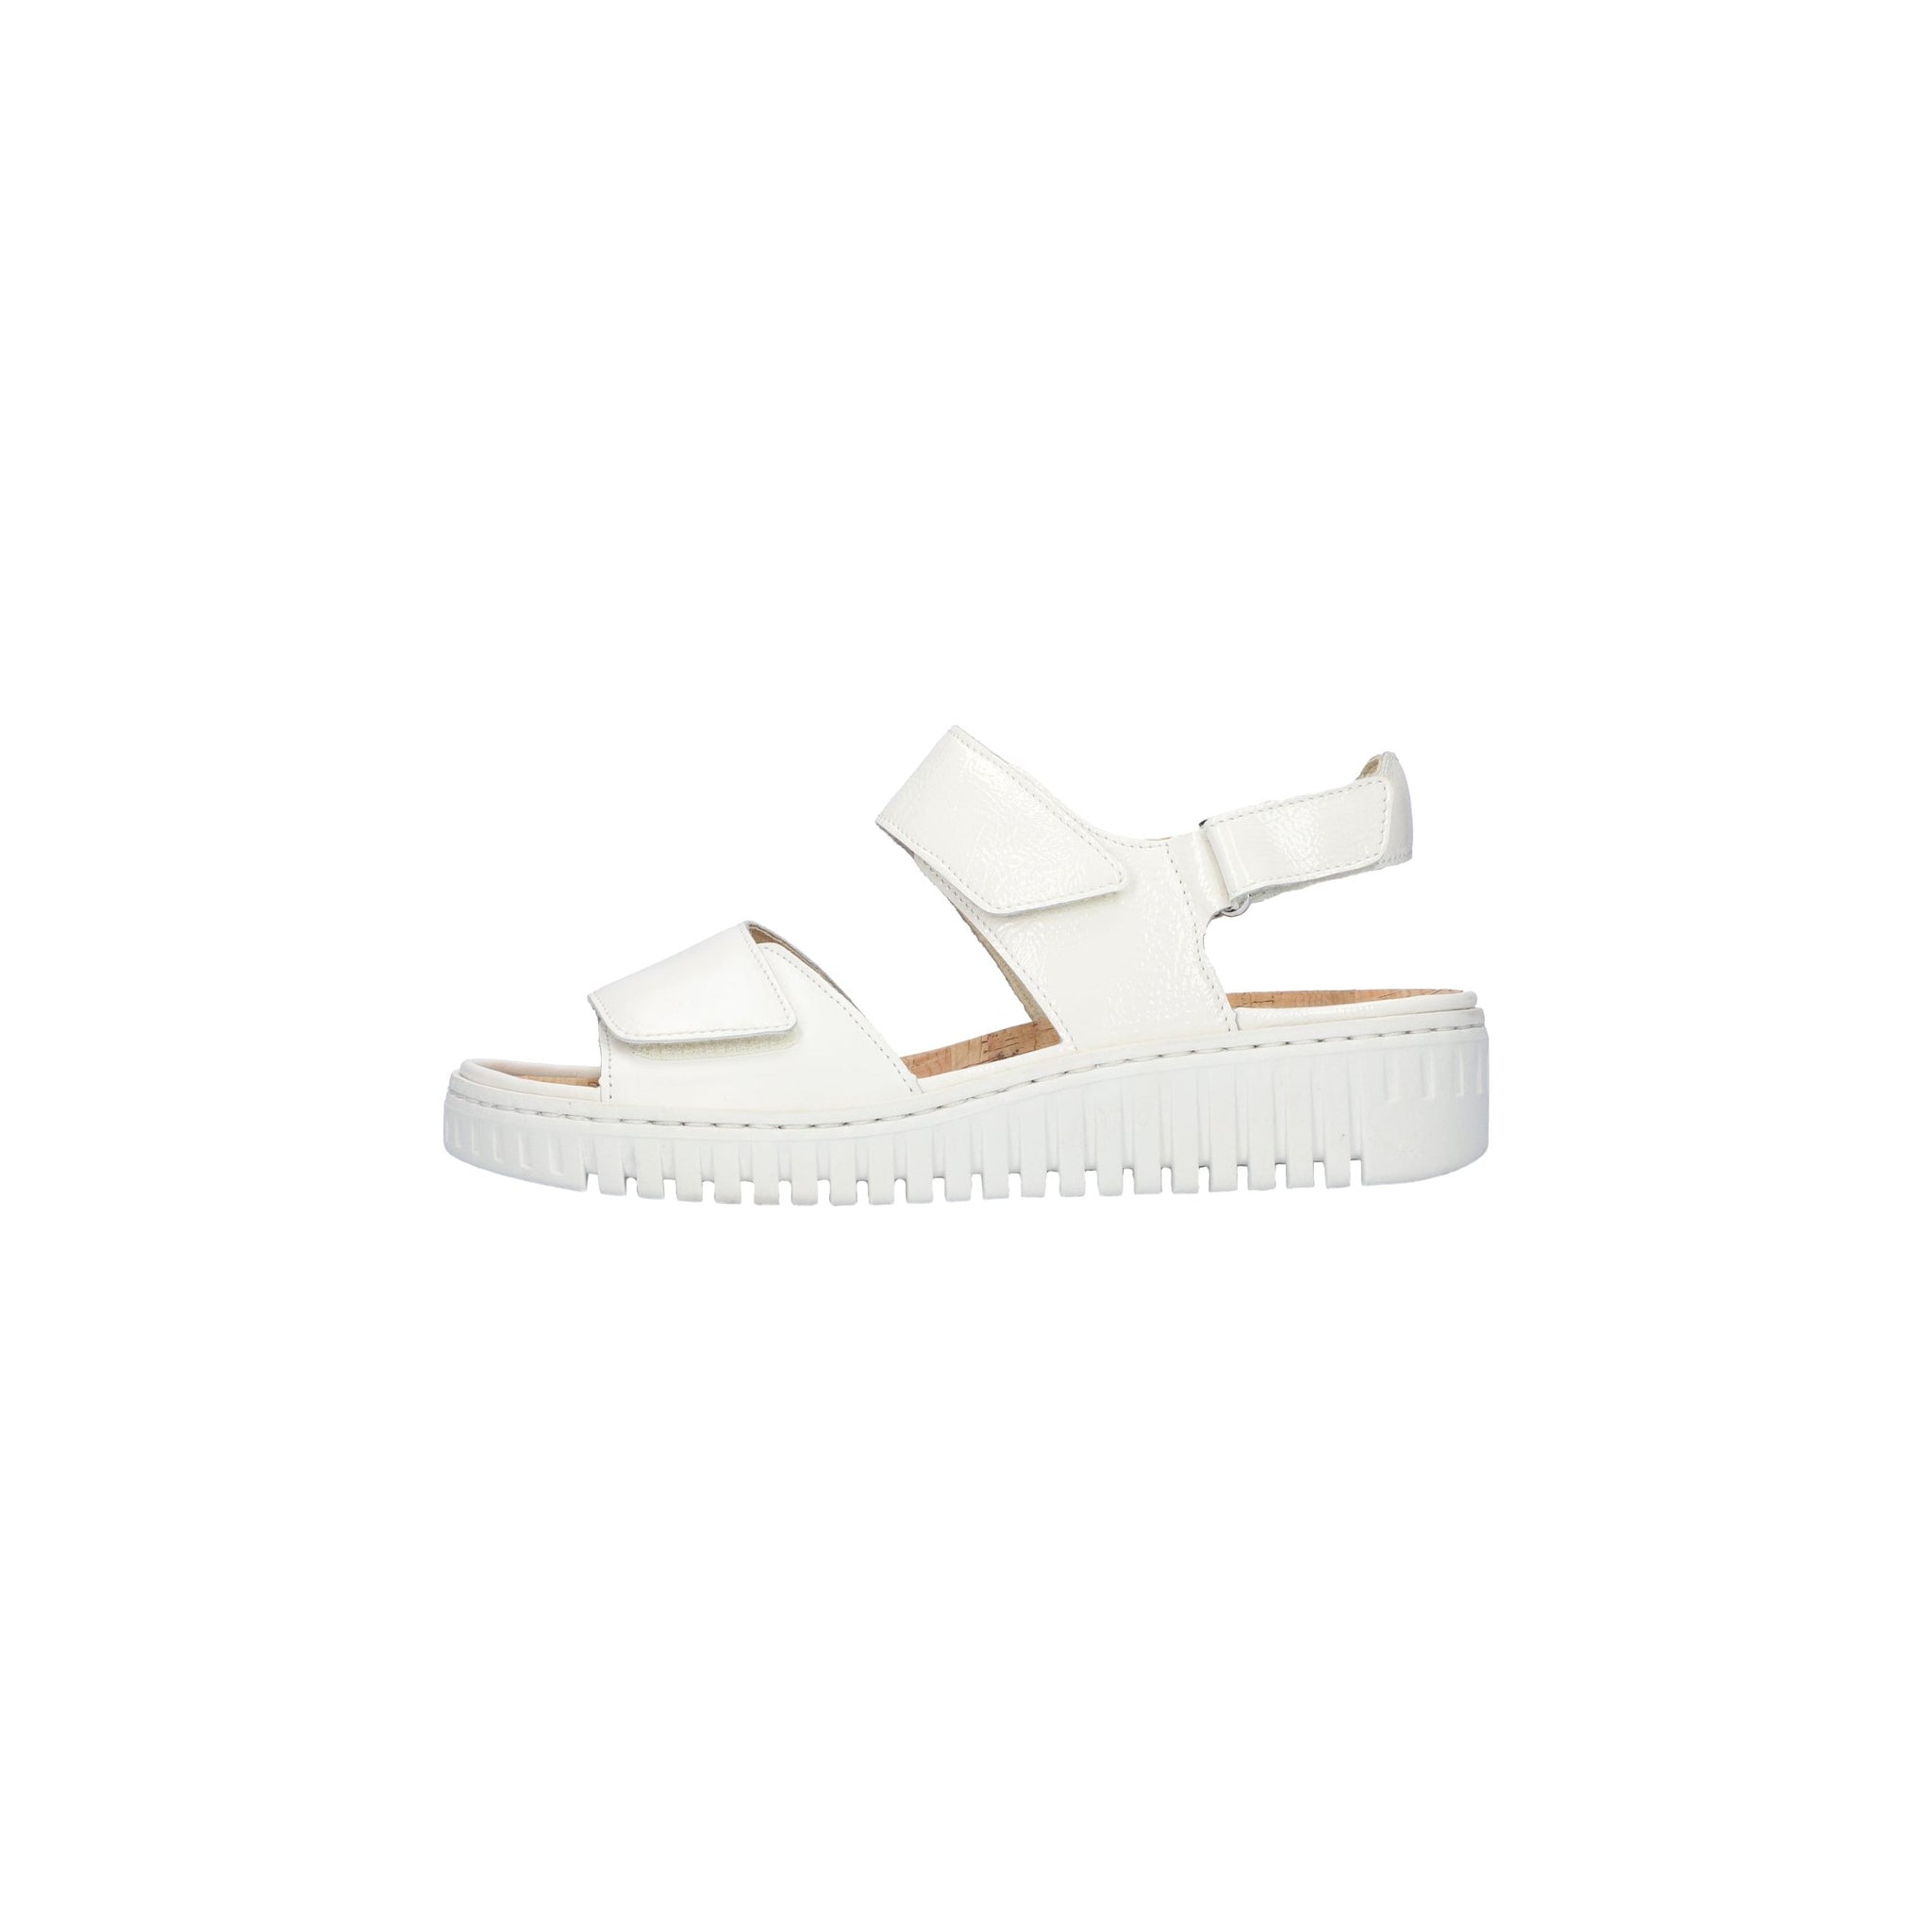 Waldlaufer Willow (955001) - Ladies Sandal in White Patent . Waldlaufer Shoes | Wide Fit Shoes | Wisemans | Bantry | Co. Cork | Munster | Shoe Shop| Ireland